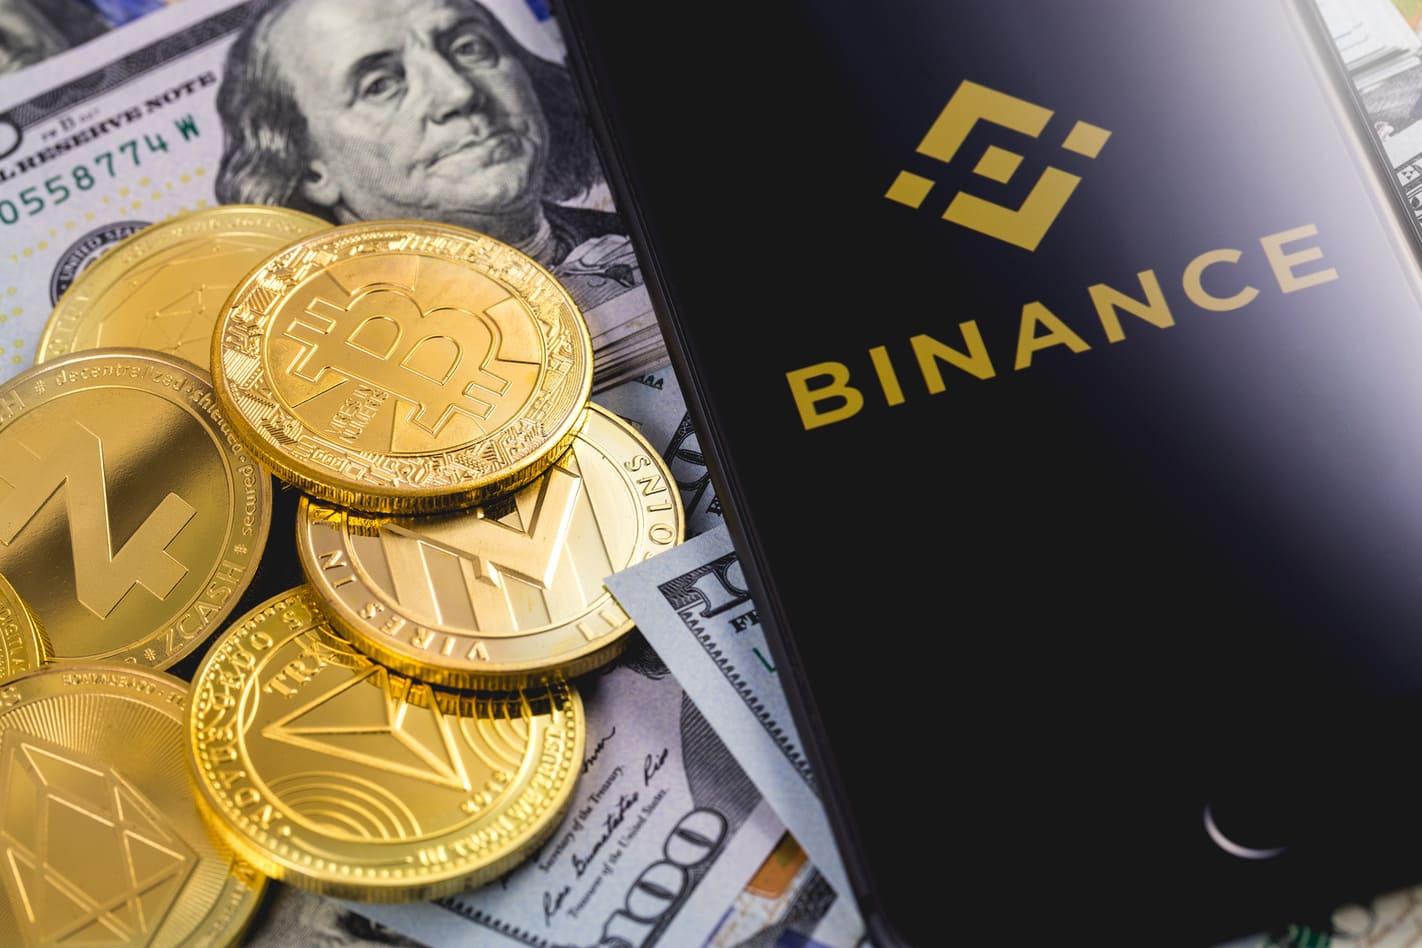  Binance Sees Over $3 Billion in Customer Withdrawals